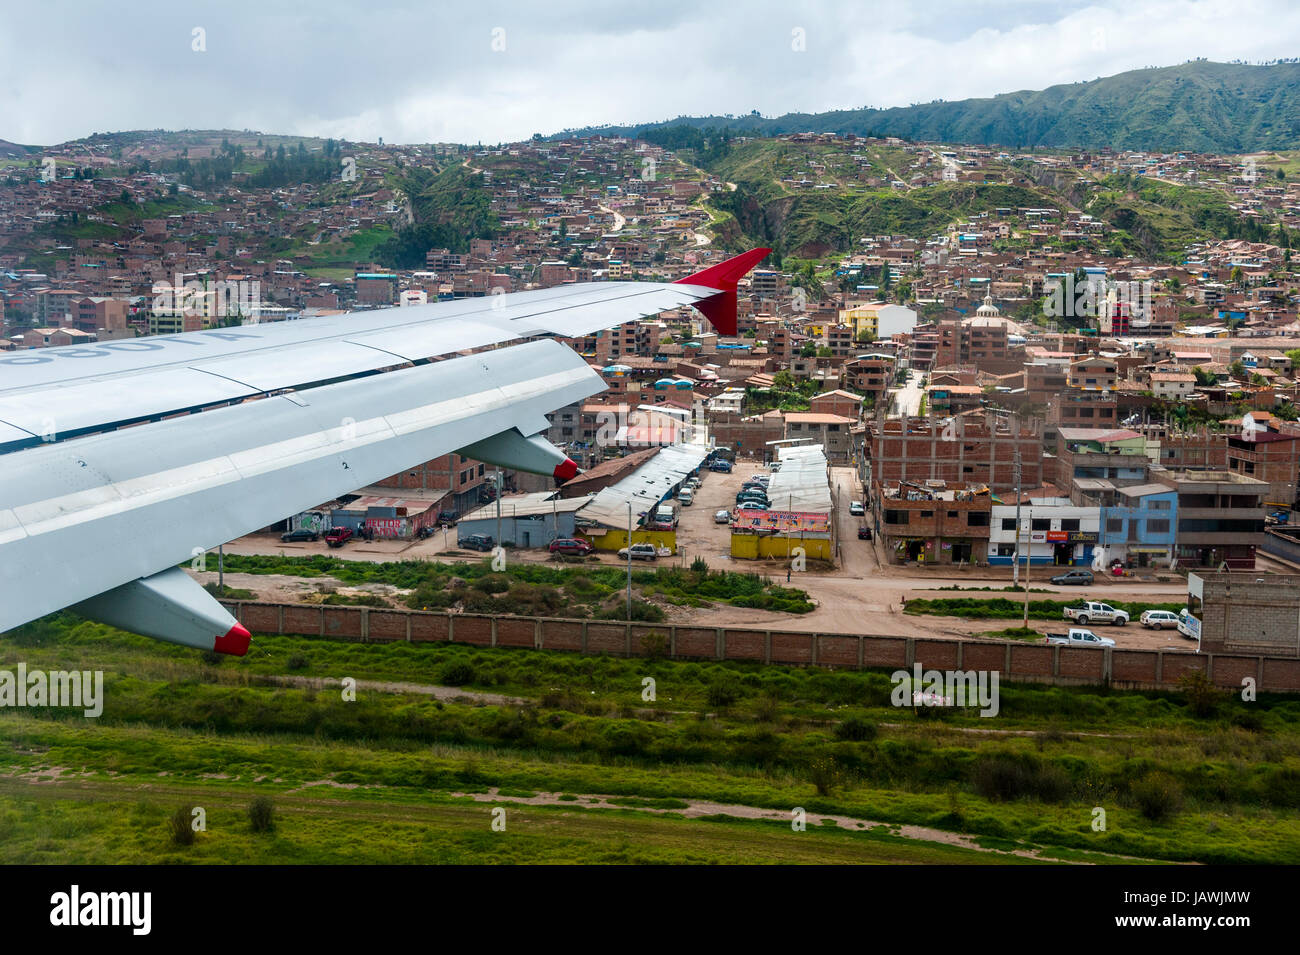 A plane wing flying over an airport and city suburbs in the Andes mountains. Stock Photo